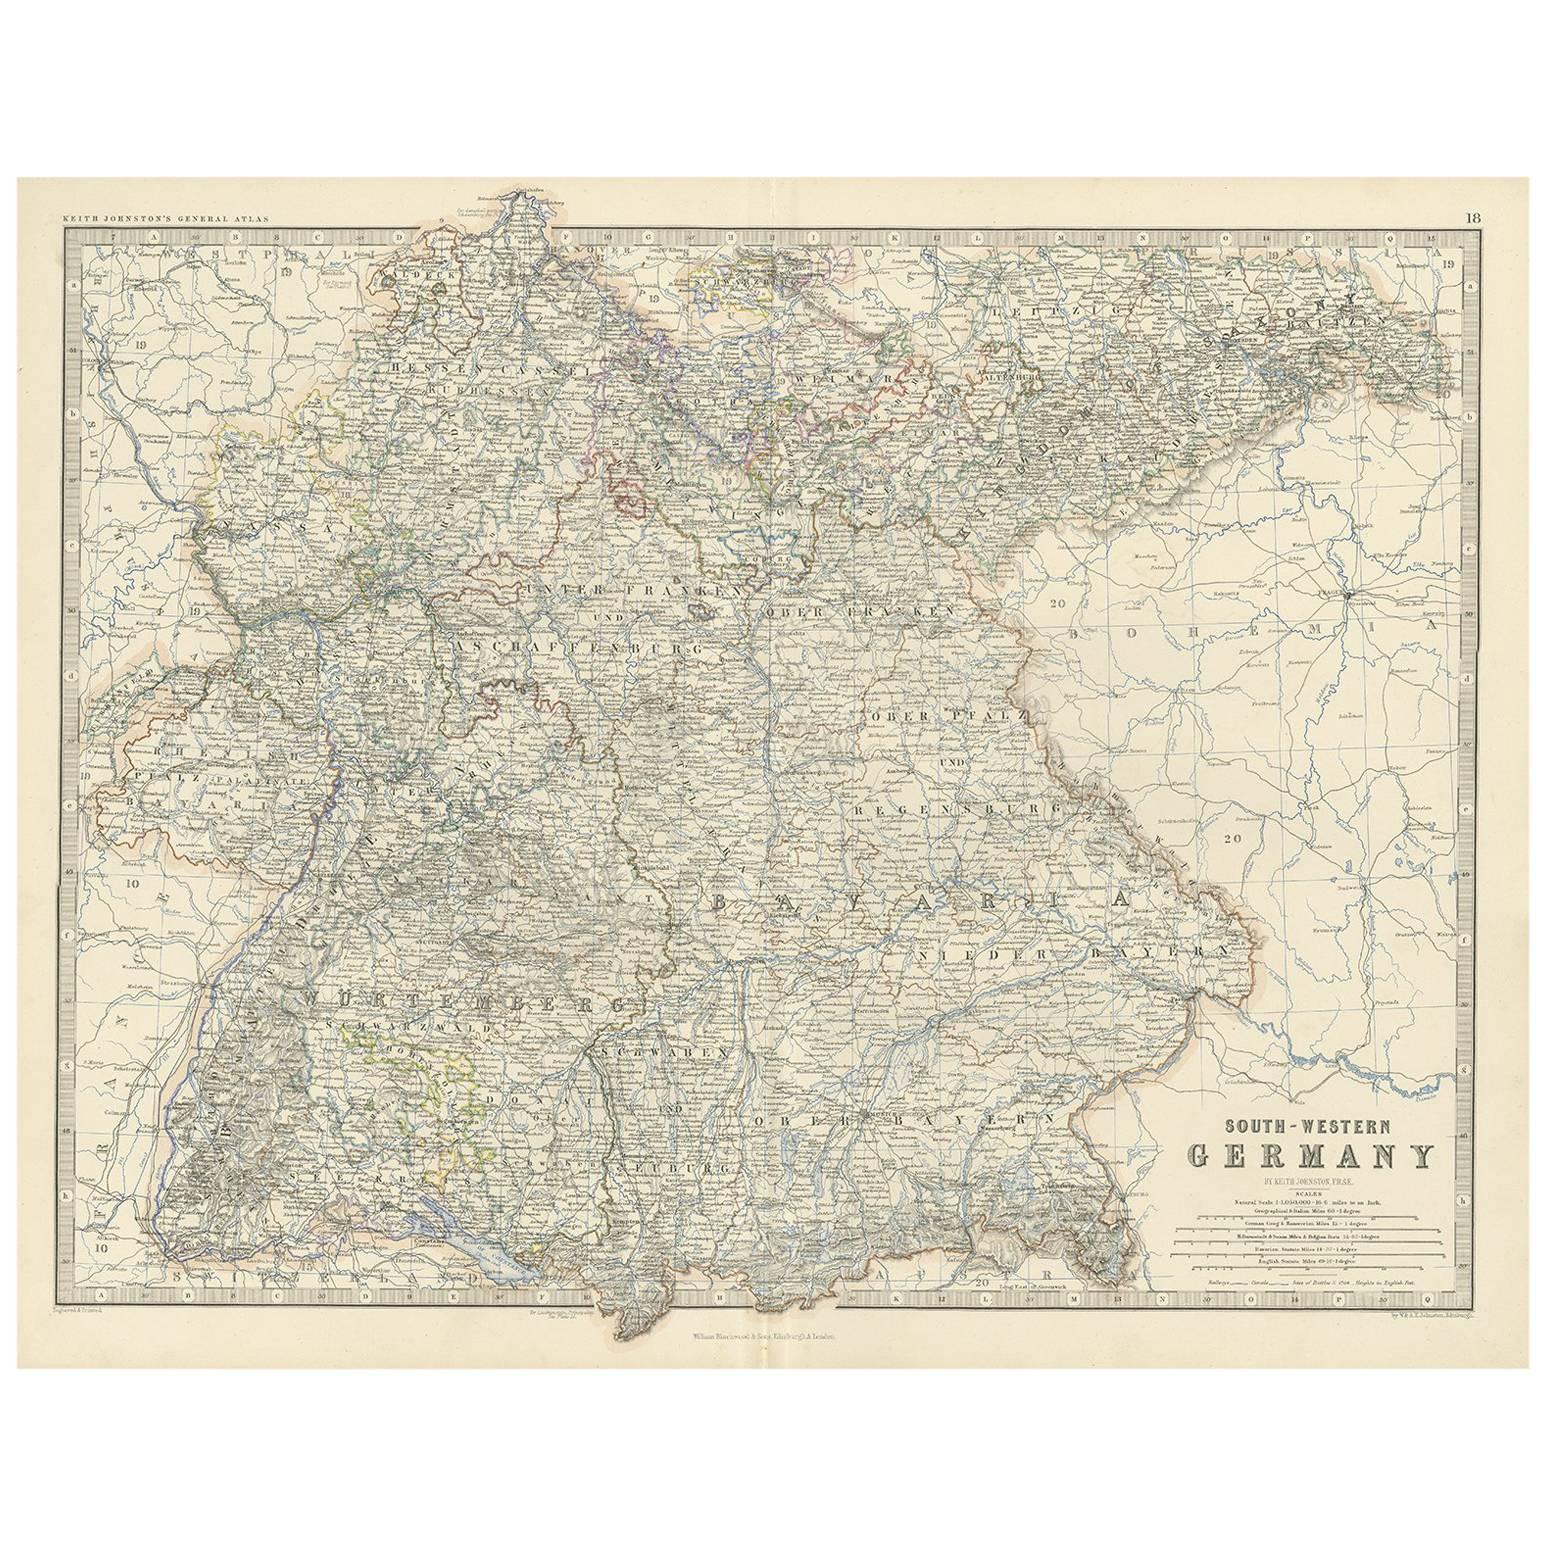 Antique Map of South-Western Germany by A.K. Johnston, 1865